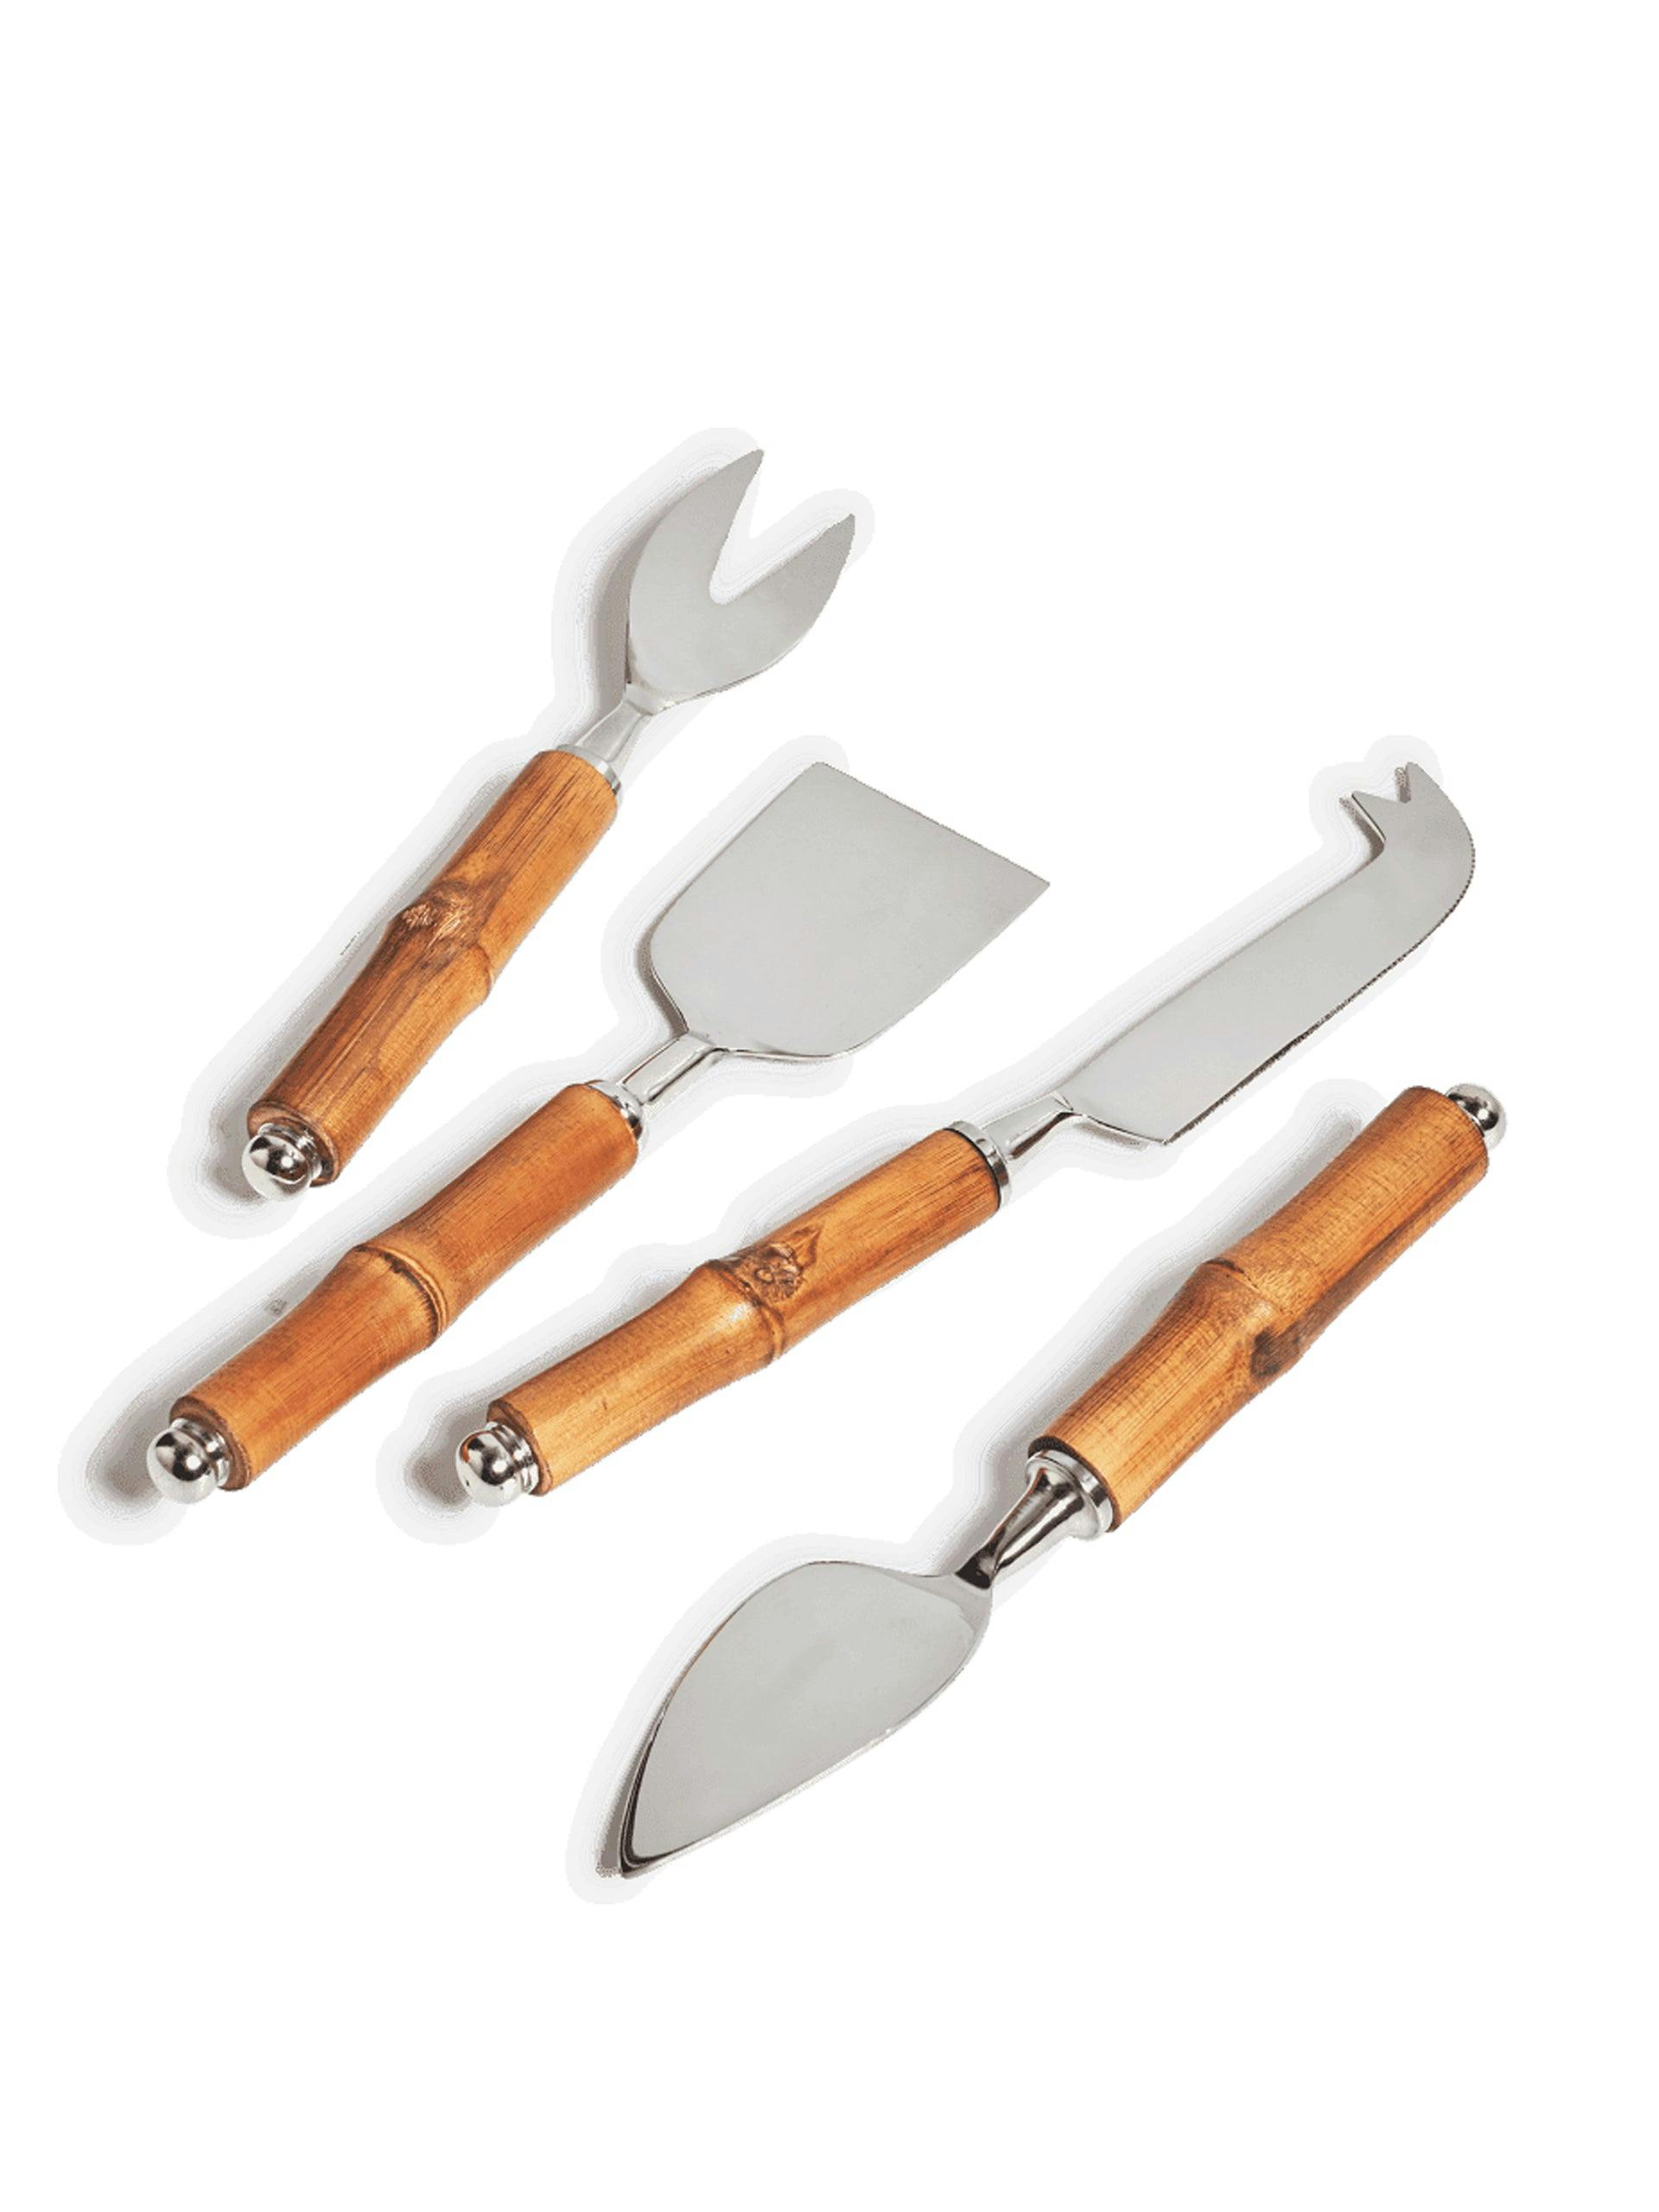 Set of Meishan cheese knives